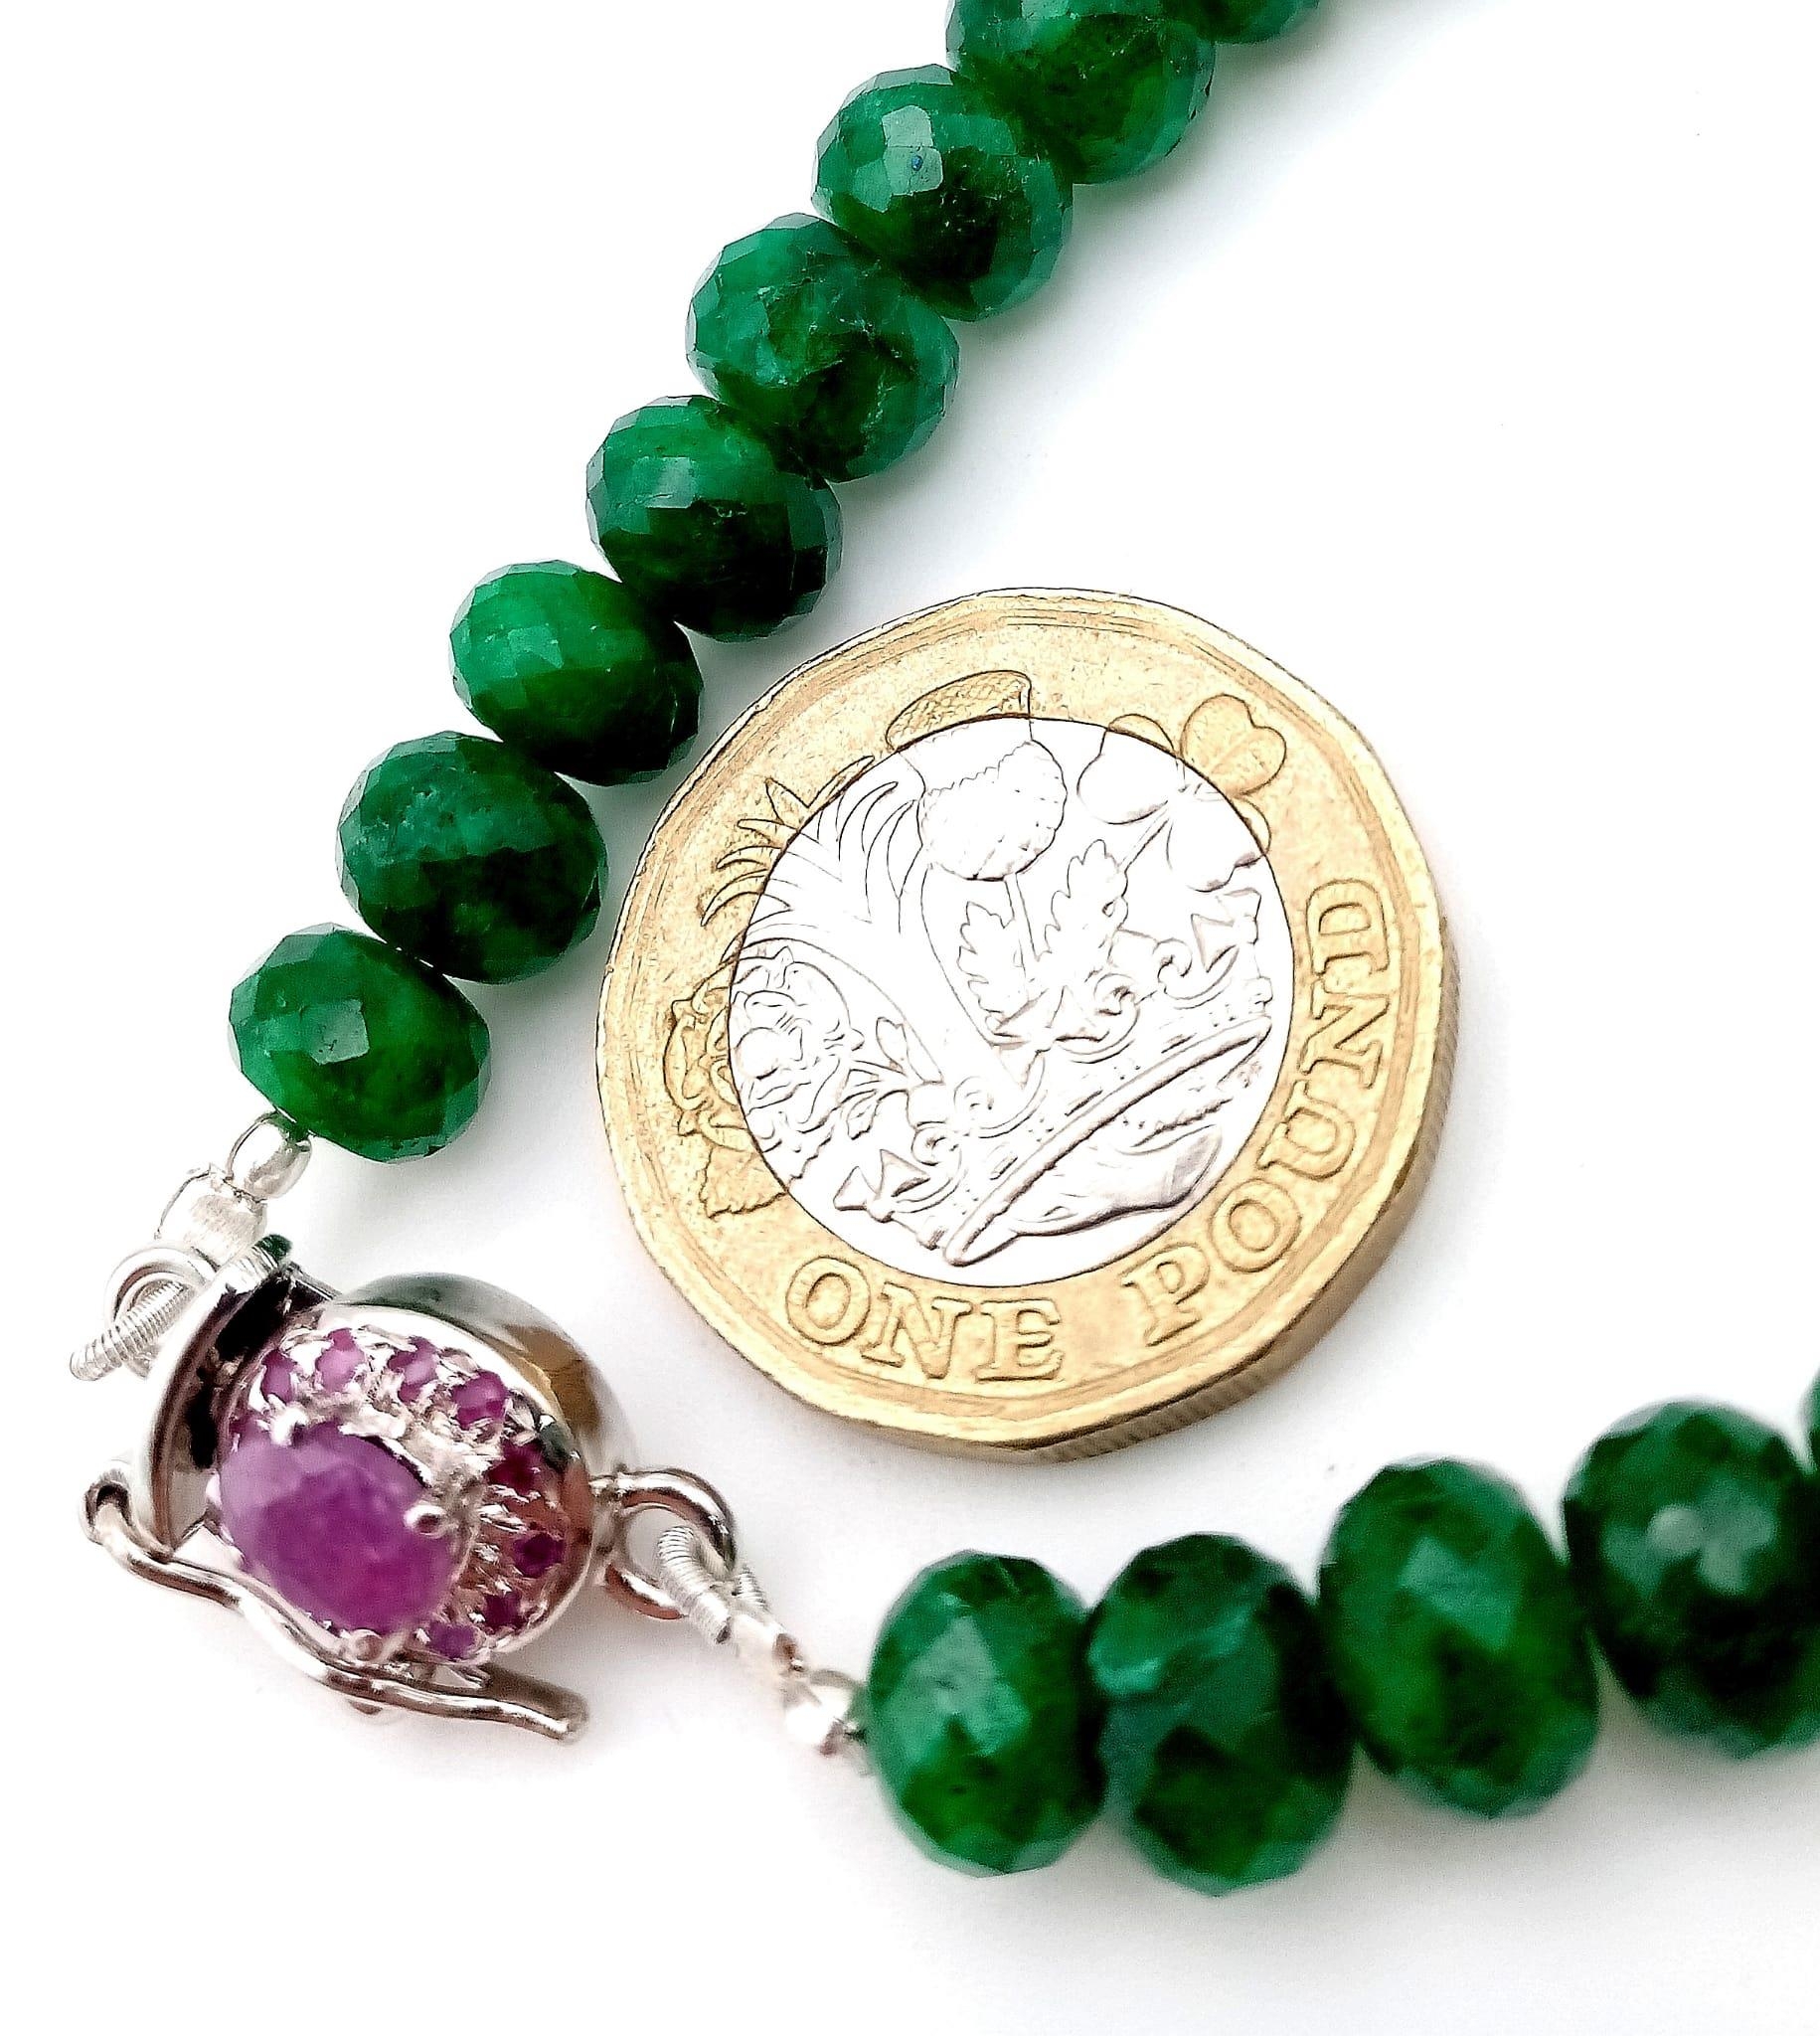 A 120ct Emerald Rondelle Gemstone Bracelet with a 925 Silver Ruby Clasp. 17cm. - Image 3 of 5